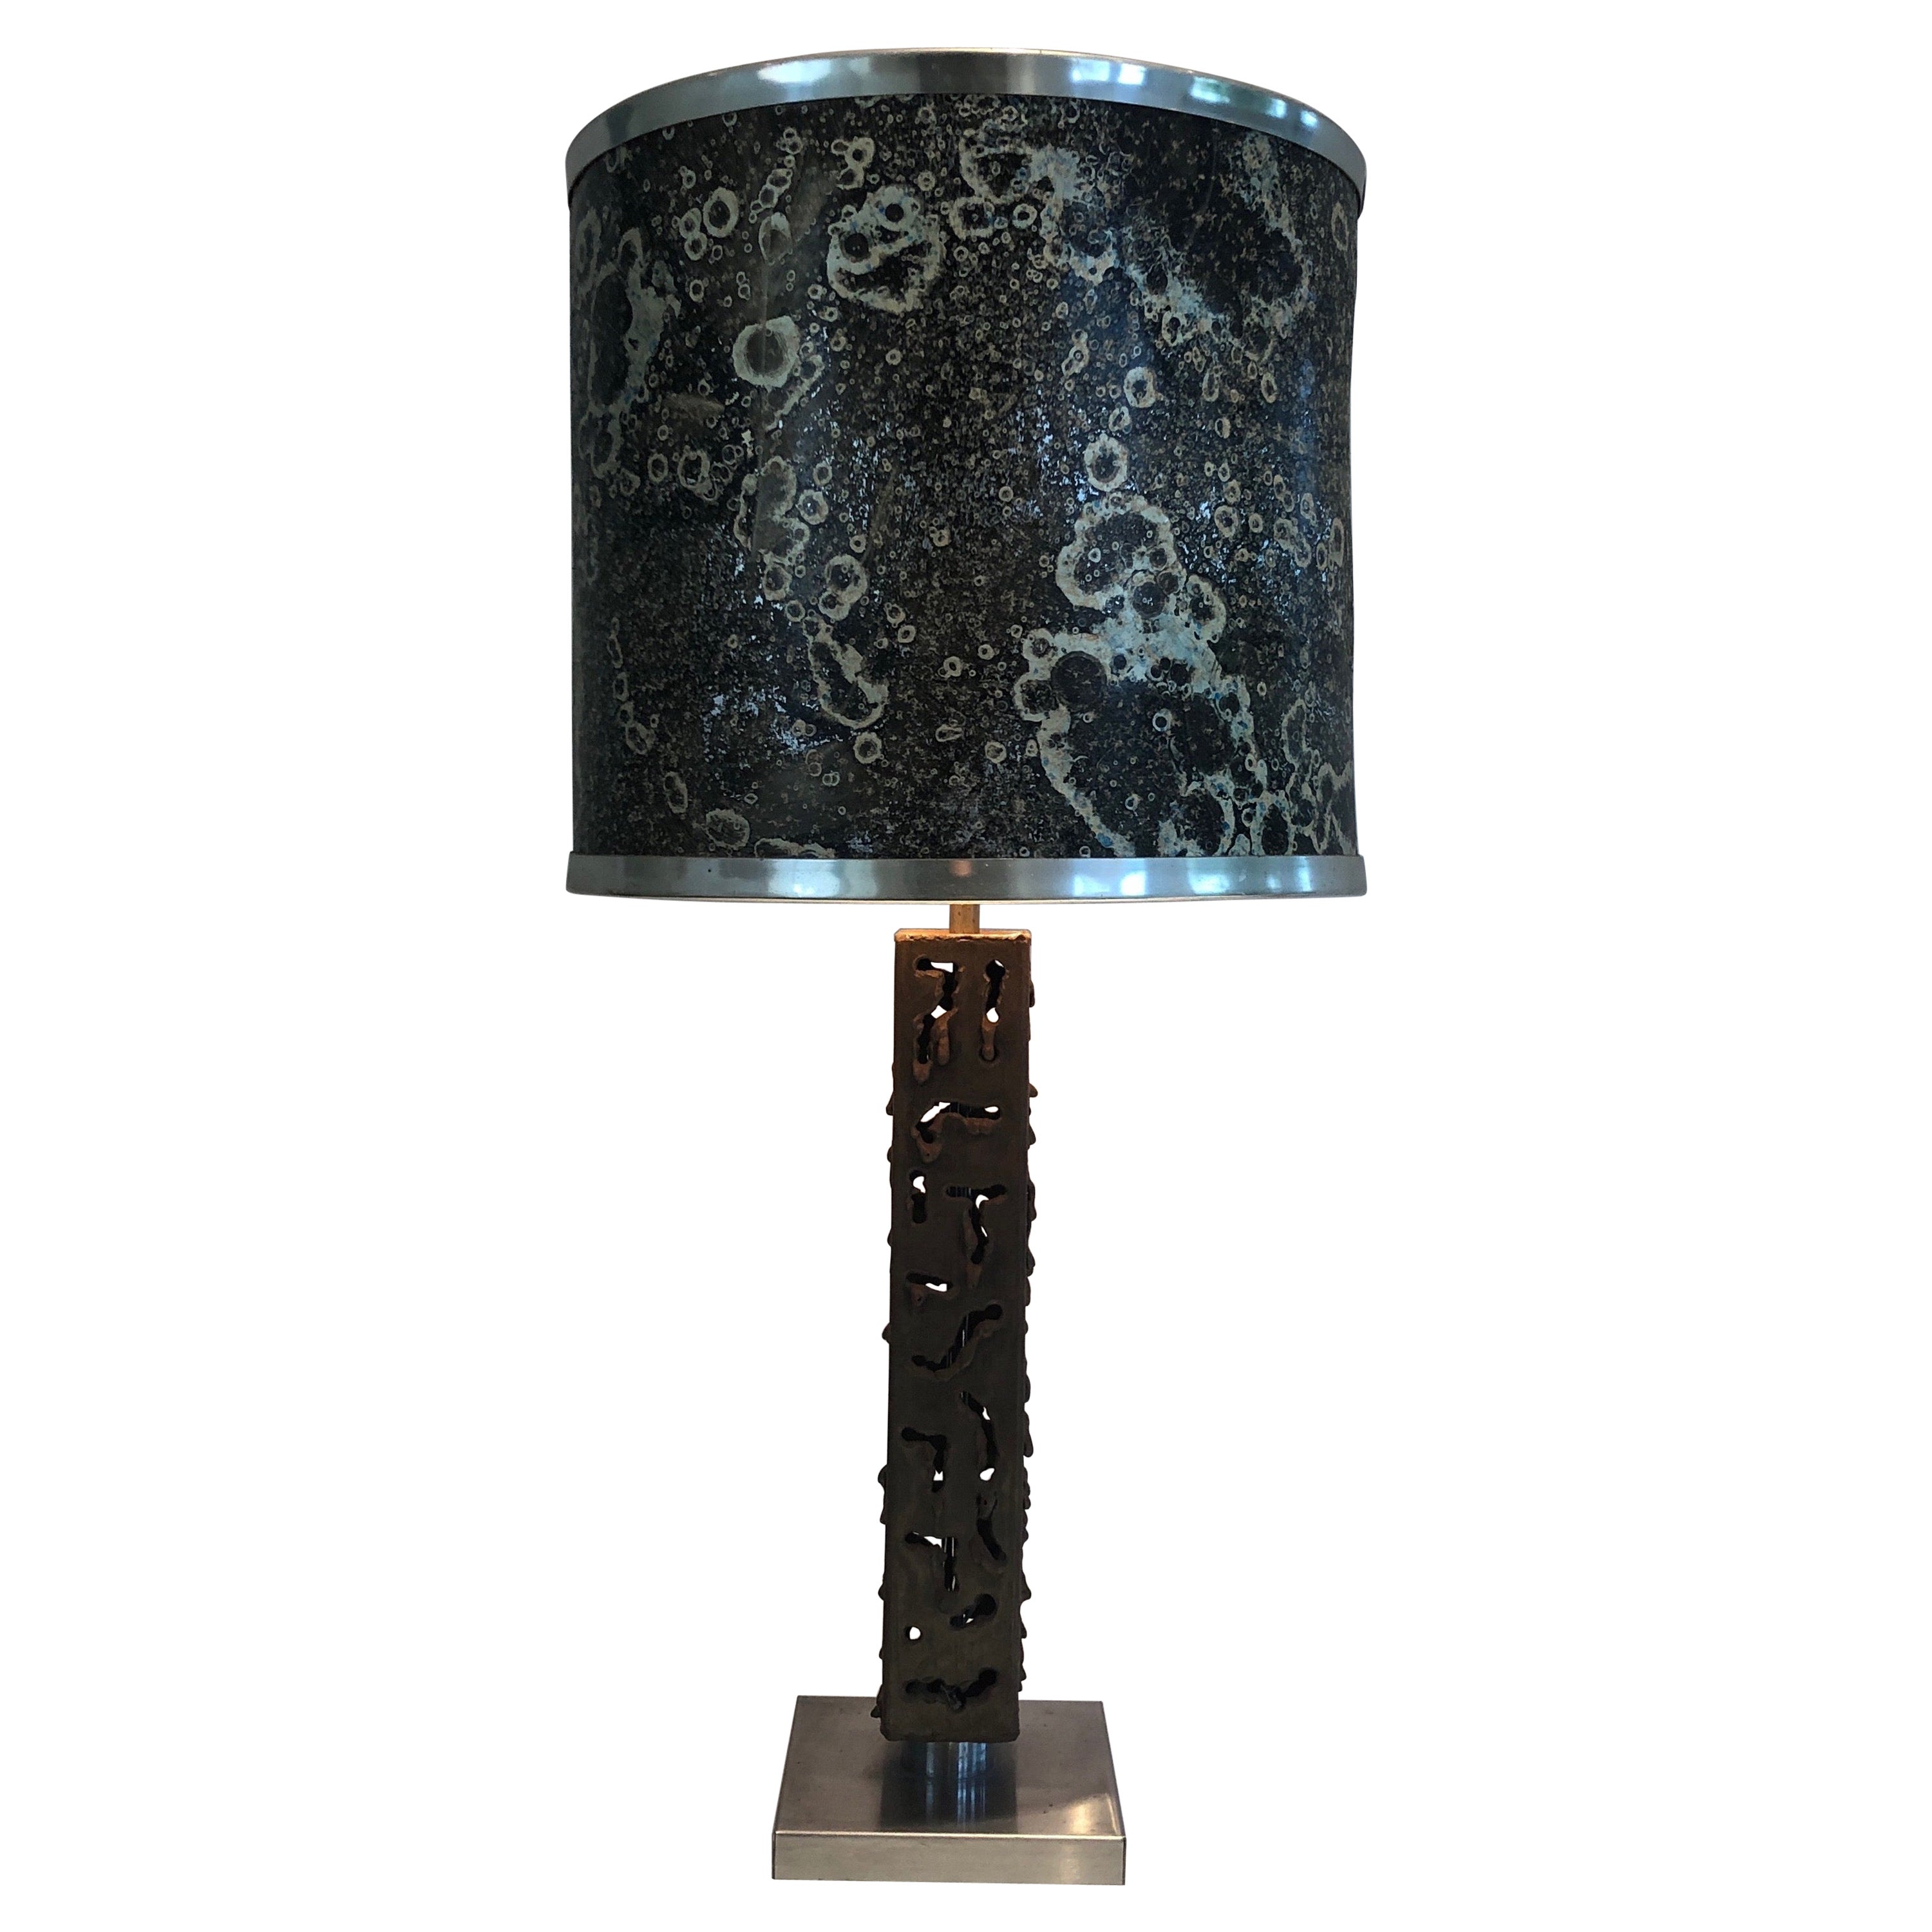 Worked Steel Design Table Lamp, French Work, circa 1970